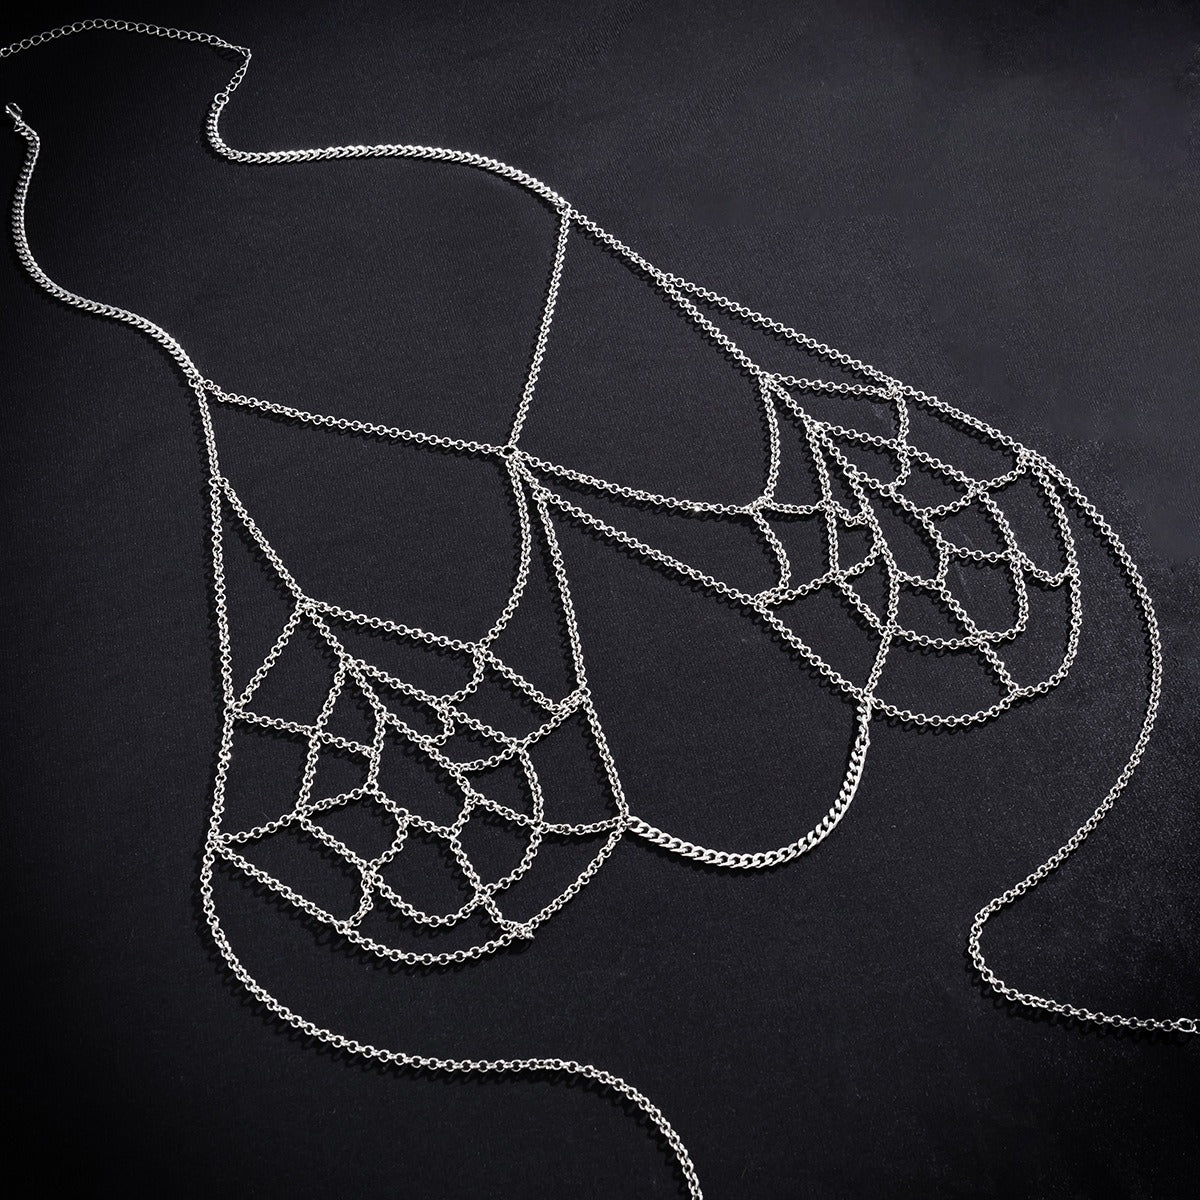 Gothic Chain for Body and Chest with Spider Web